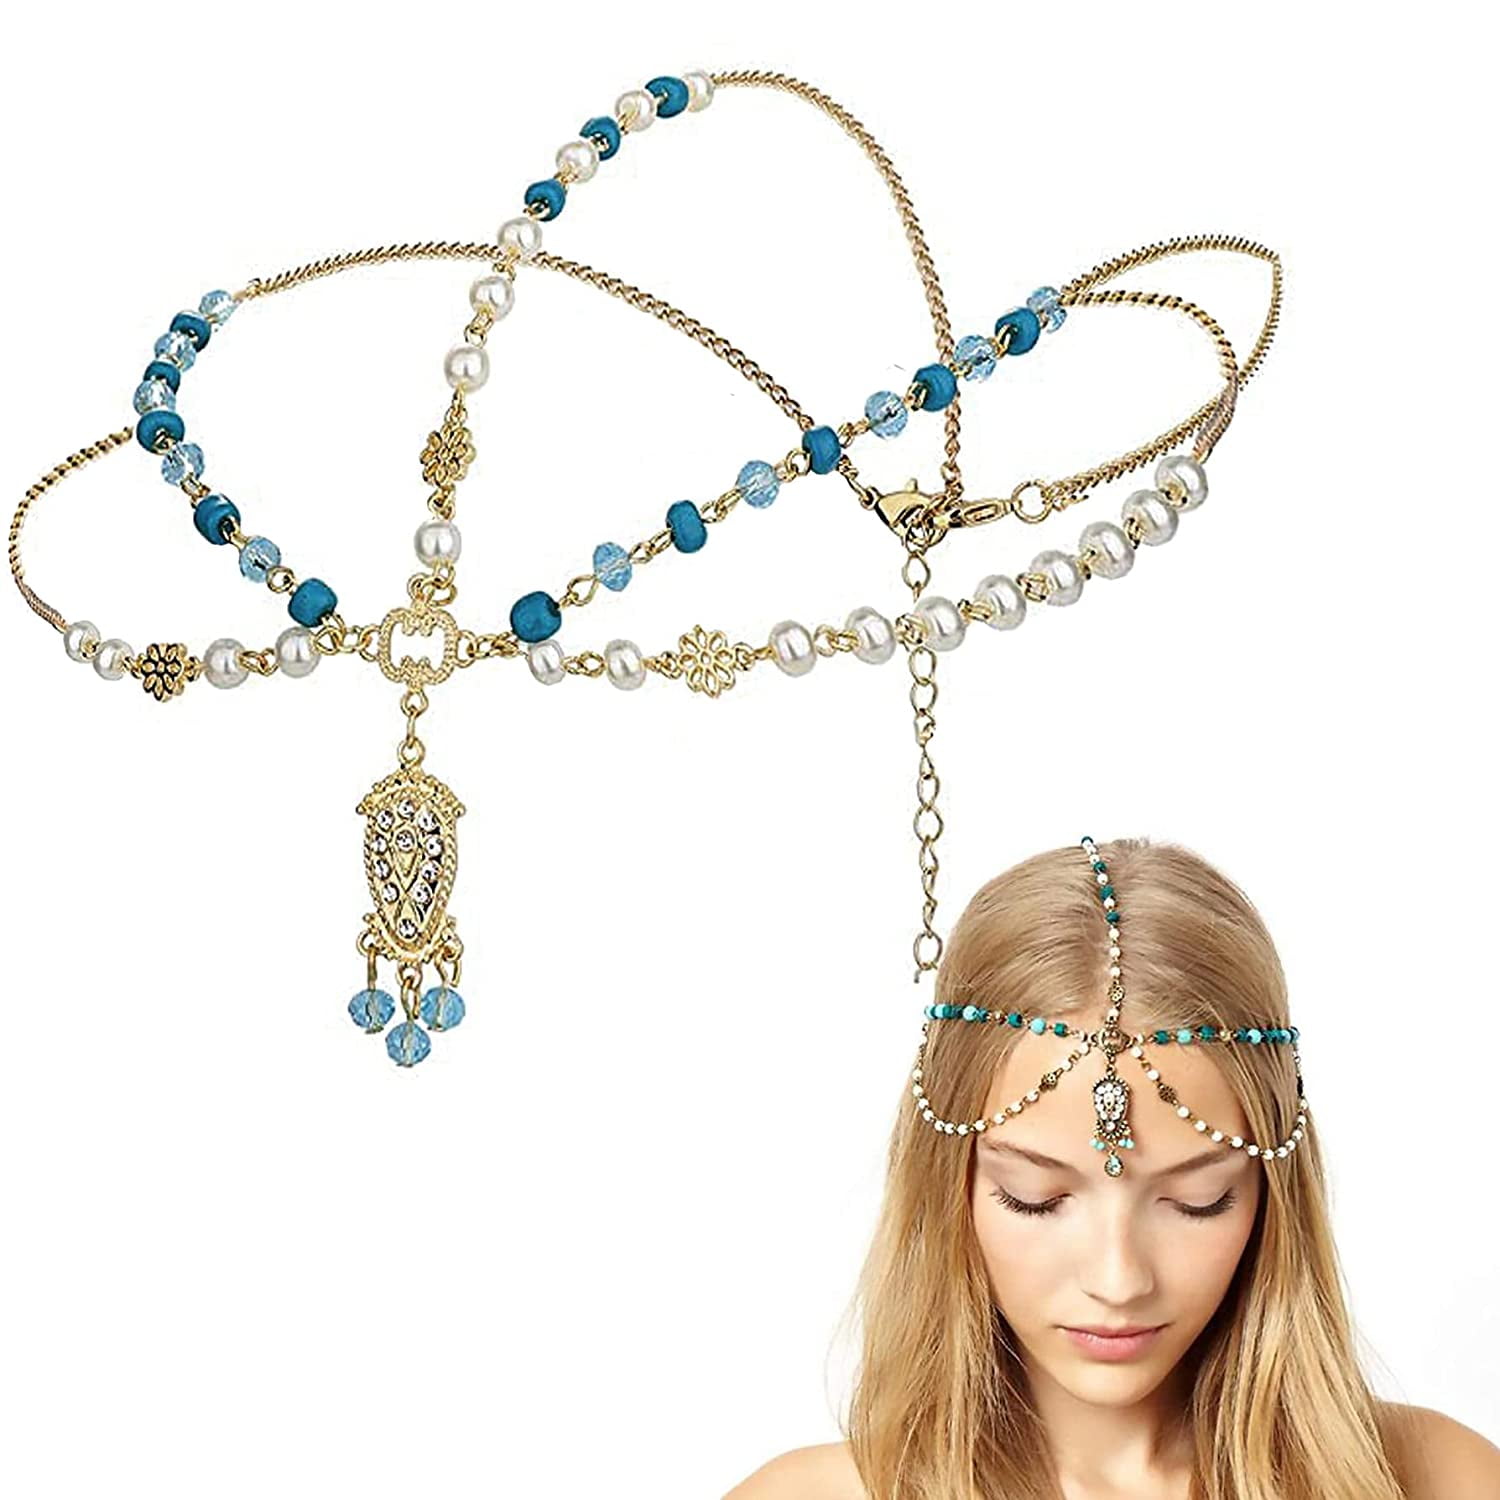 Hair Combs Twin with chains & Tassels Bridal Jewellery Pin Decoration Boho uk 